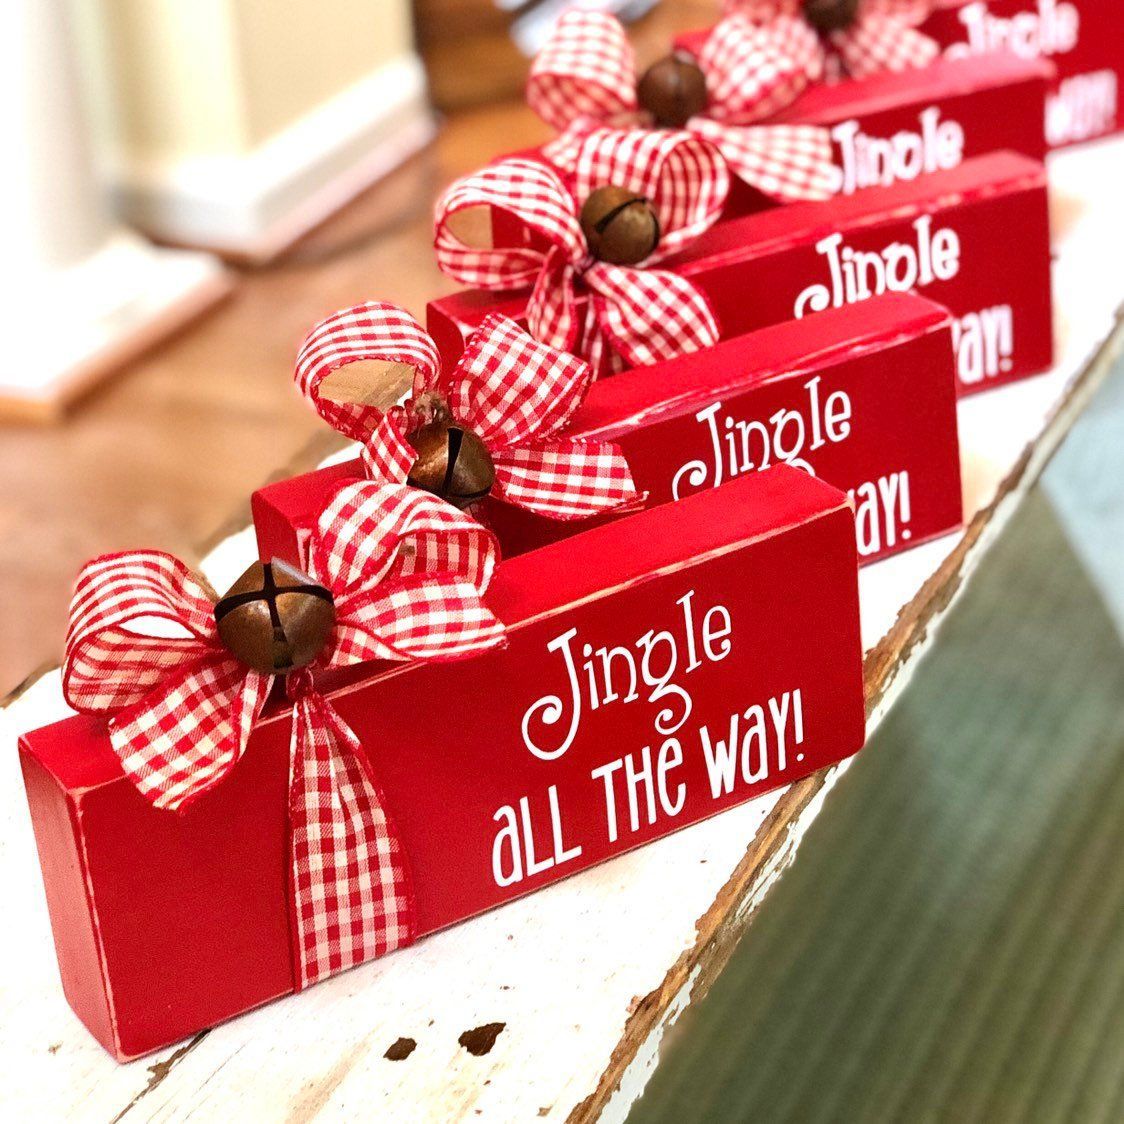 Jingle Bell Block - Wooden Christmas Sign - Jingle All the Way - Rustic Holiday Decor - Mantel or Bookshelf Decor - Home Accent -   18 tulisan holiday Tumblr ideas